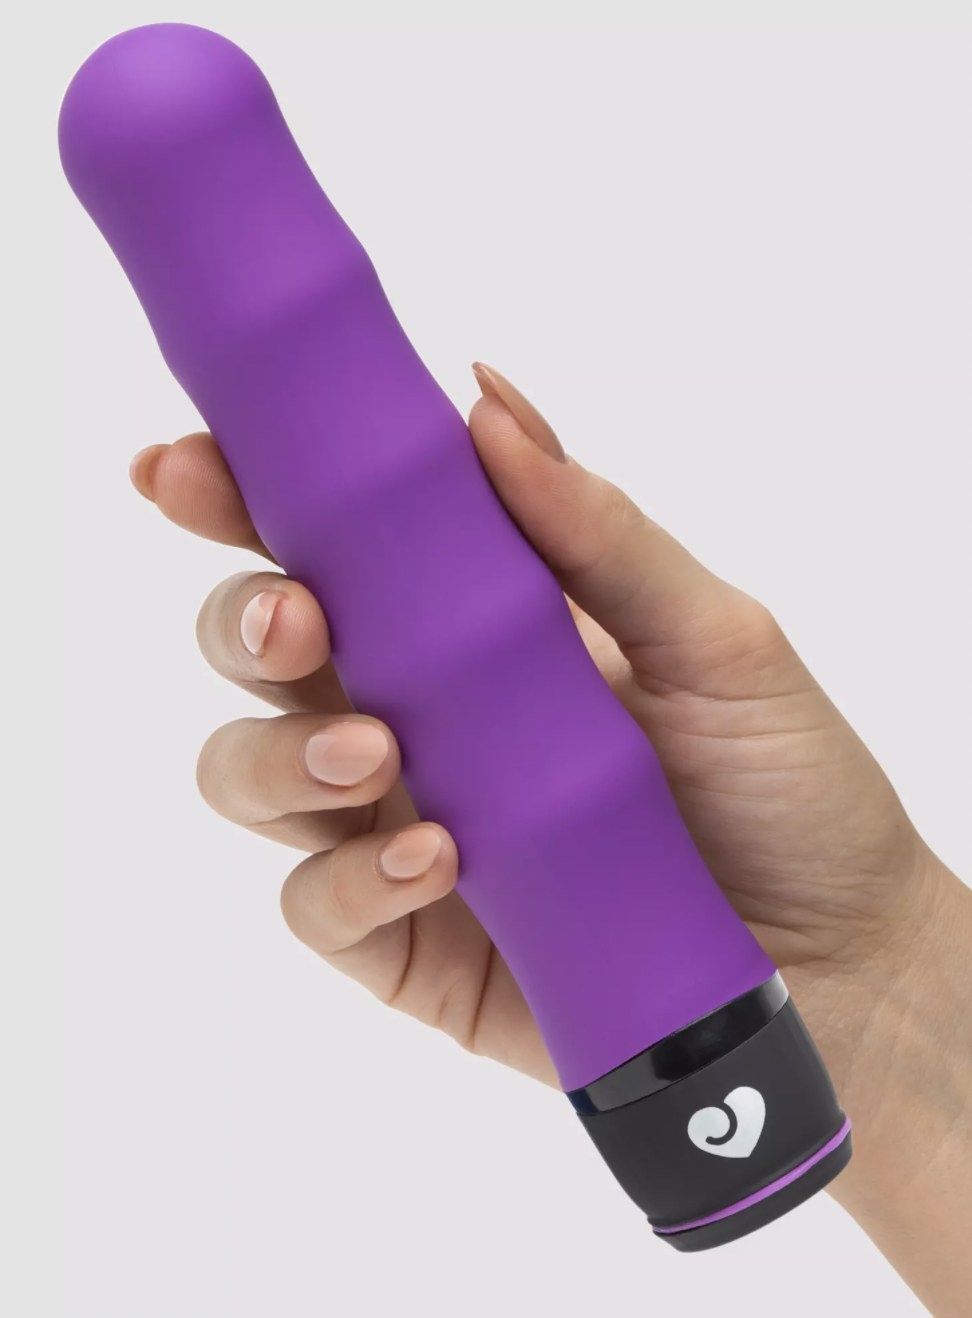 The purple vibrator with ribbed texturing along the body